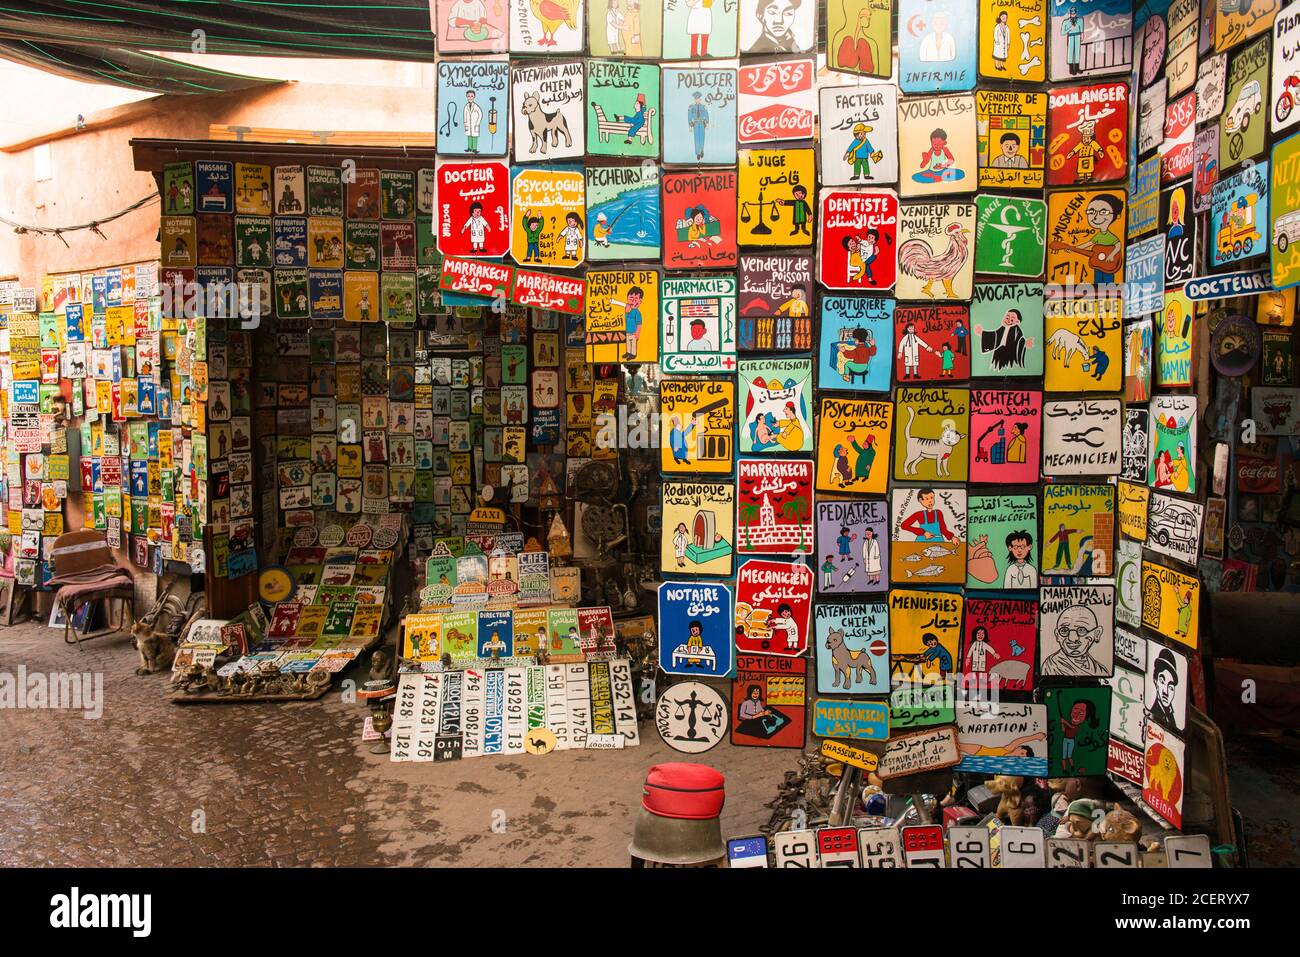 Stall selling hand painted signs in the souk within the Medina, Marrakesh Stock Photo